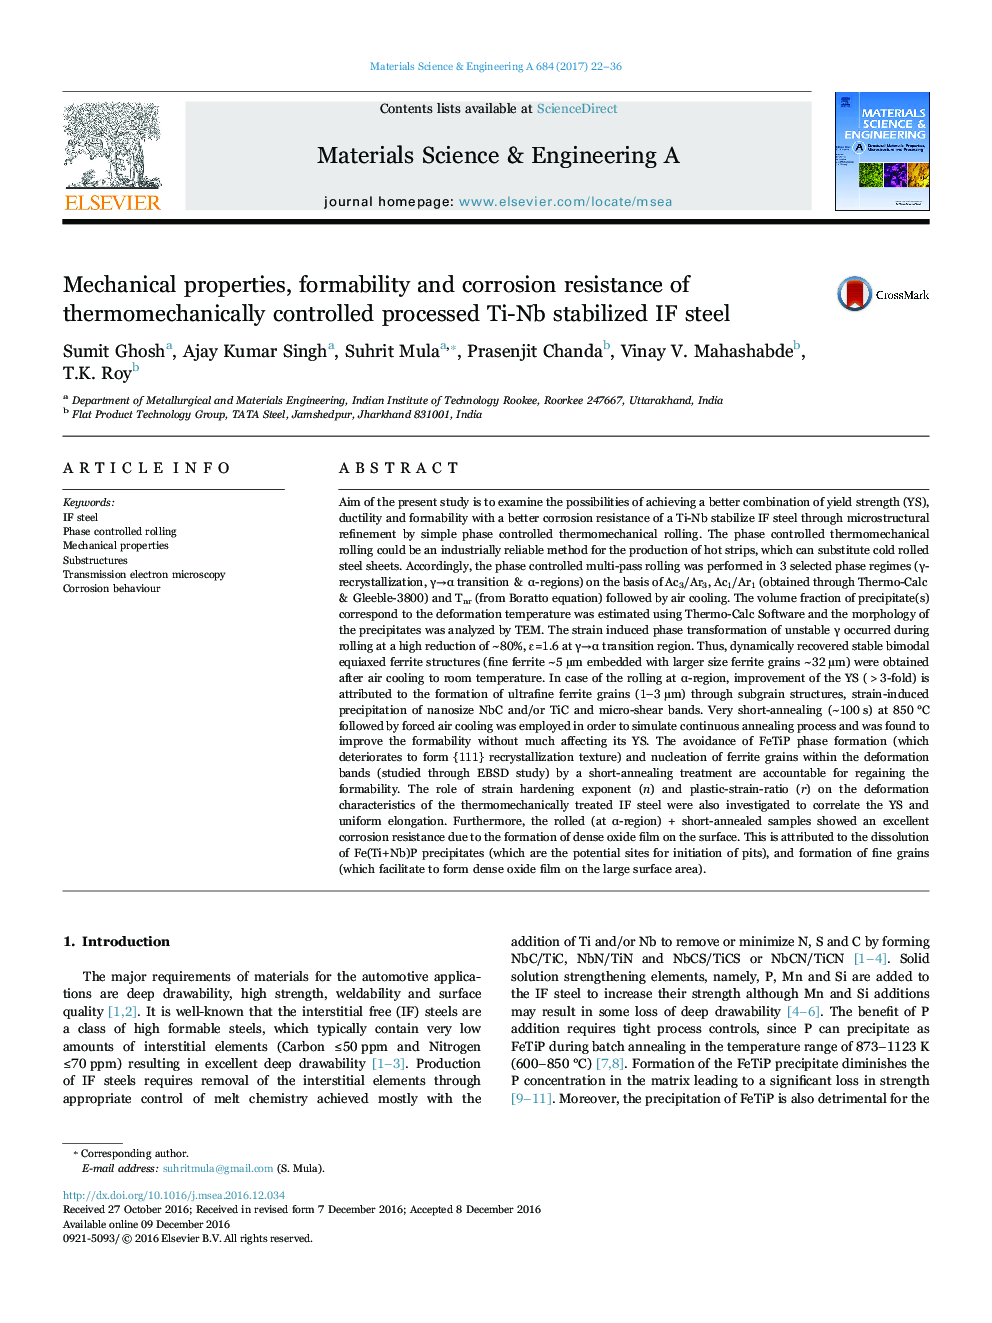 Mechanical properties, formability and corrosion resistance of thermomechanically controlled processed Ti-Nb stabilized IF steel